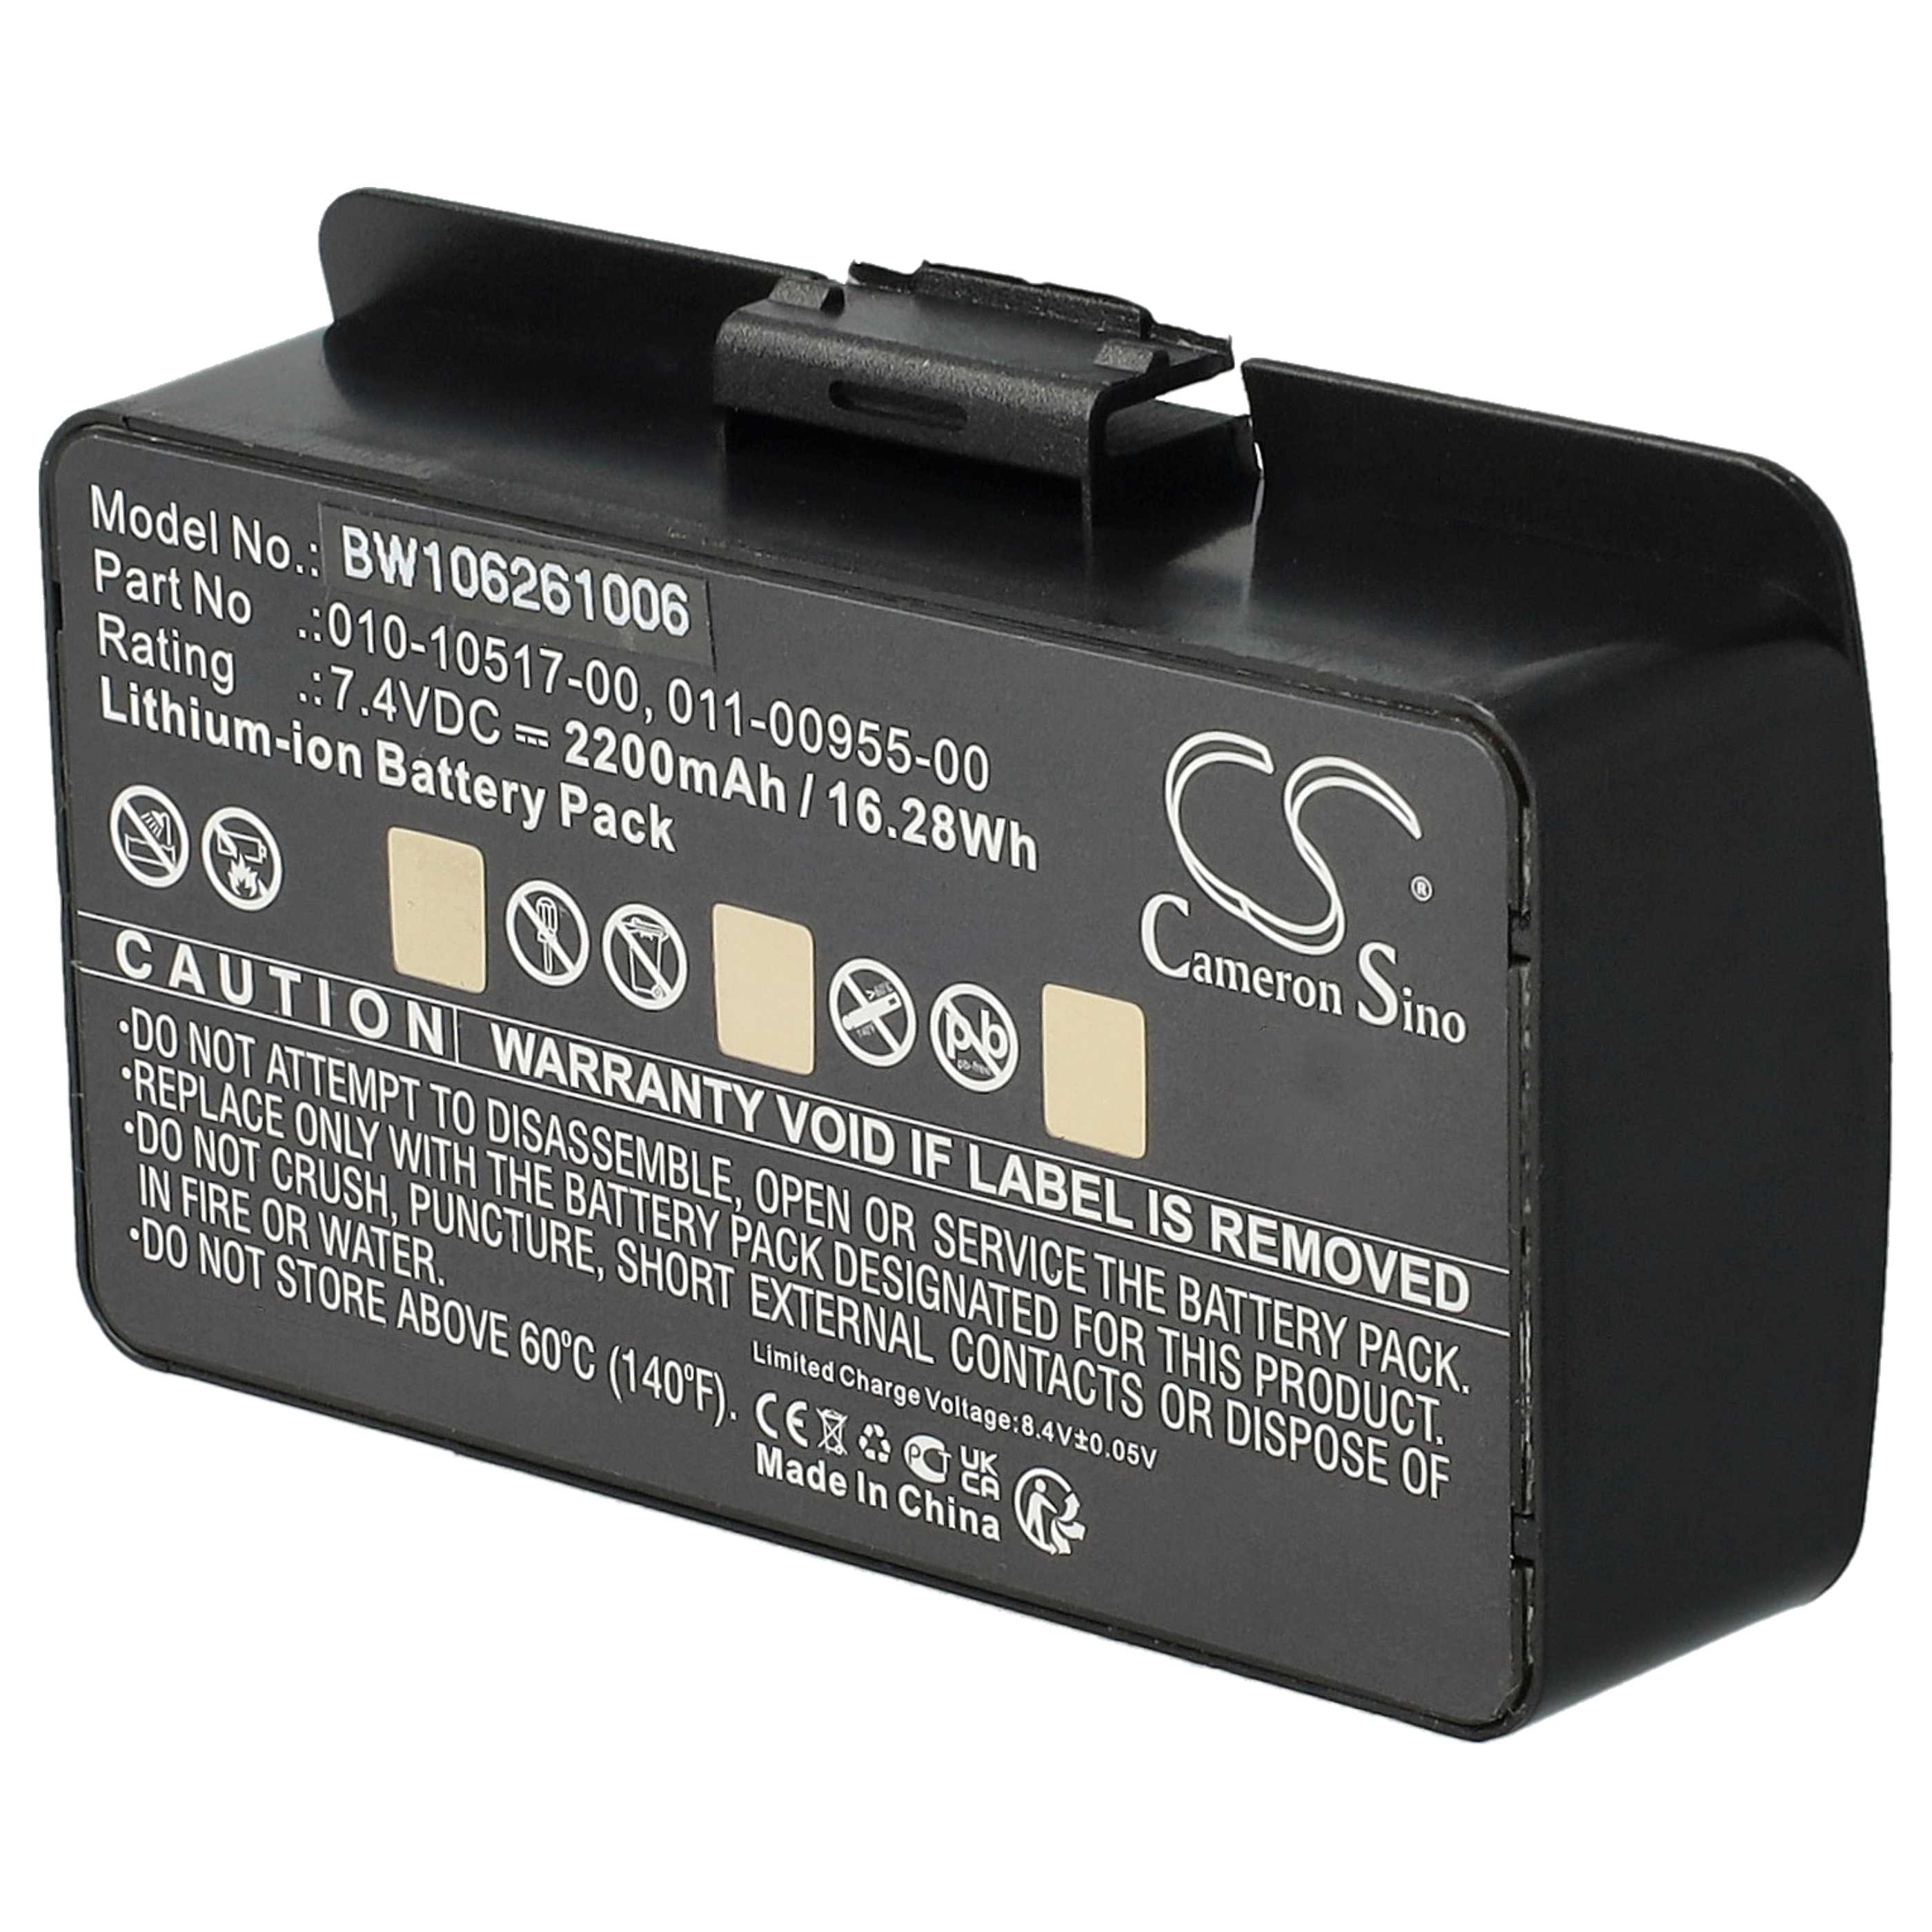 GPS Battery Replacement for Garmin 010-10517-00, 010-10517-01, 011-00955-00, 01070800001 - 2200mAh, 7.4V